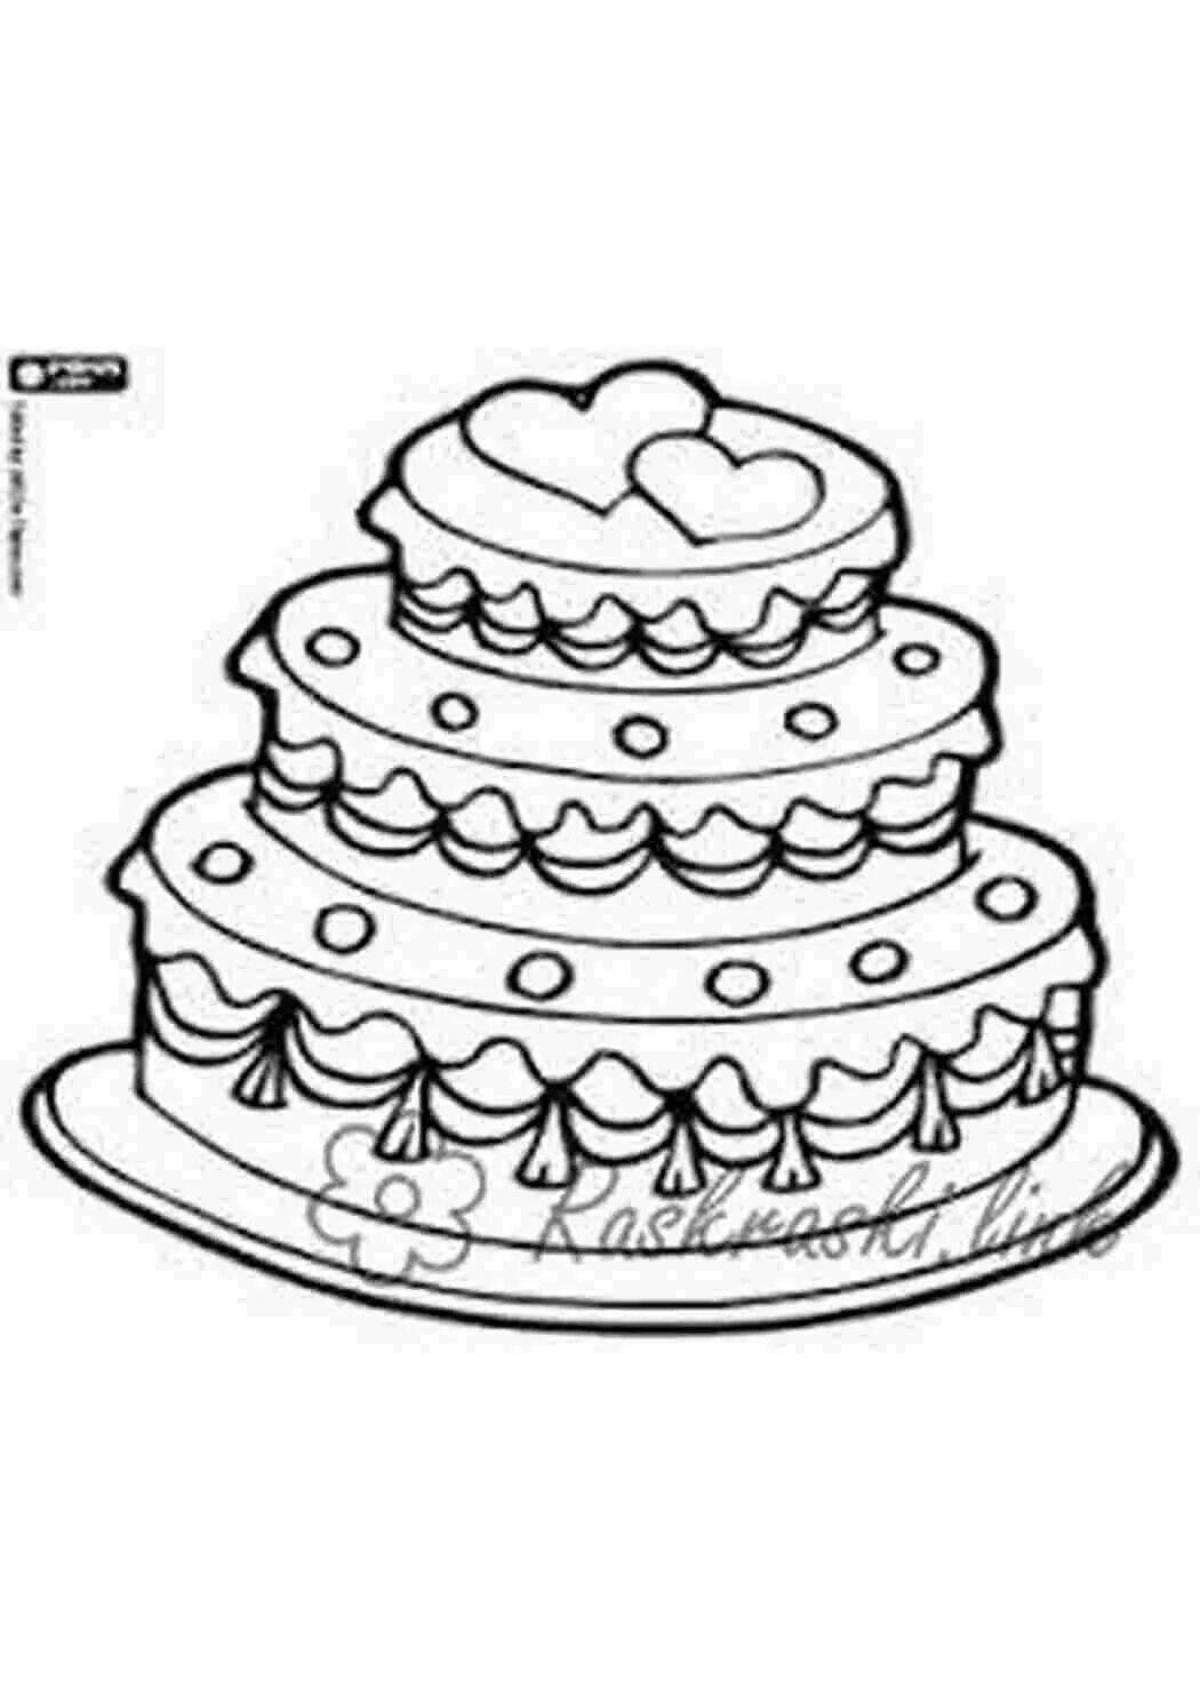 Peaceful beautiful cake coloring page